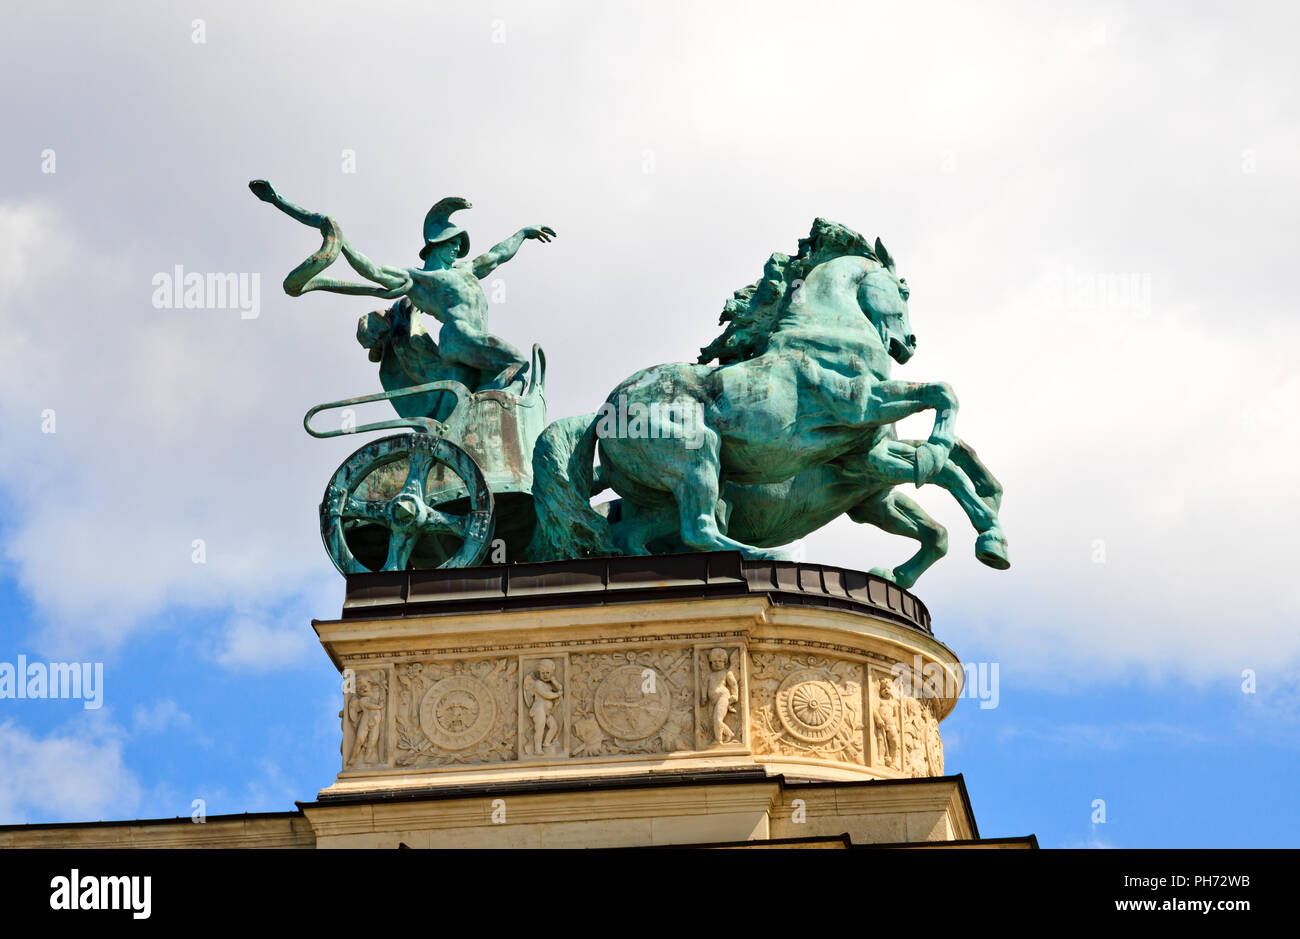 Statue at heroes square in budapest Stock Photo